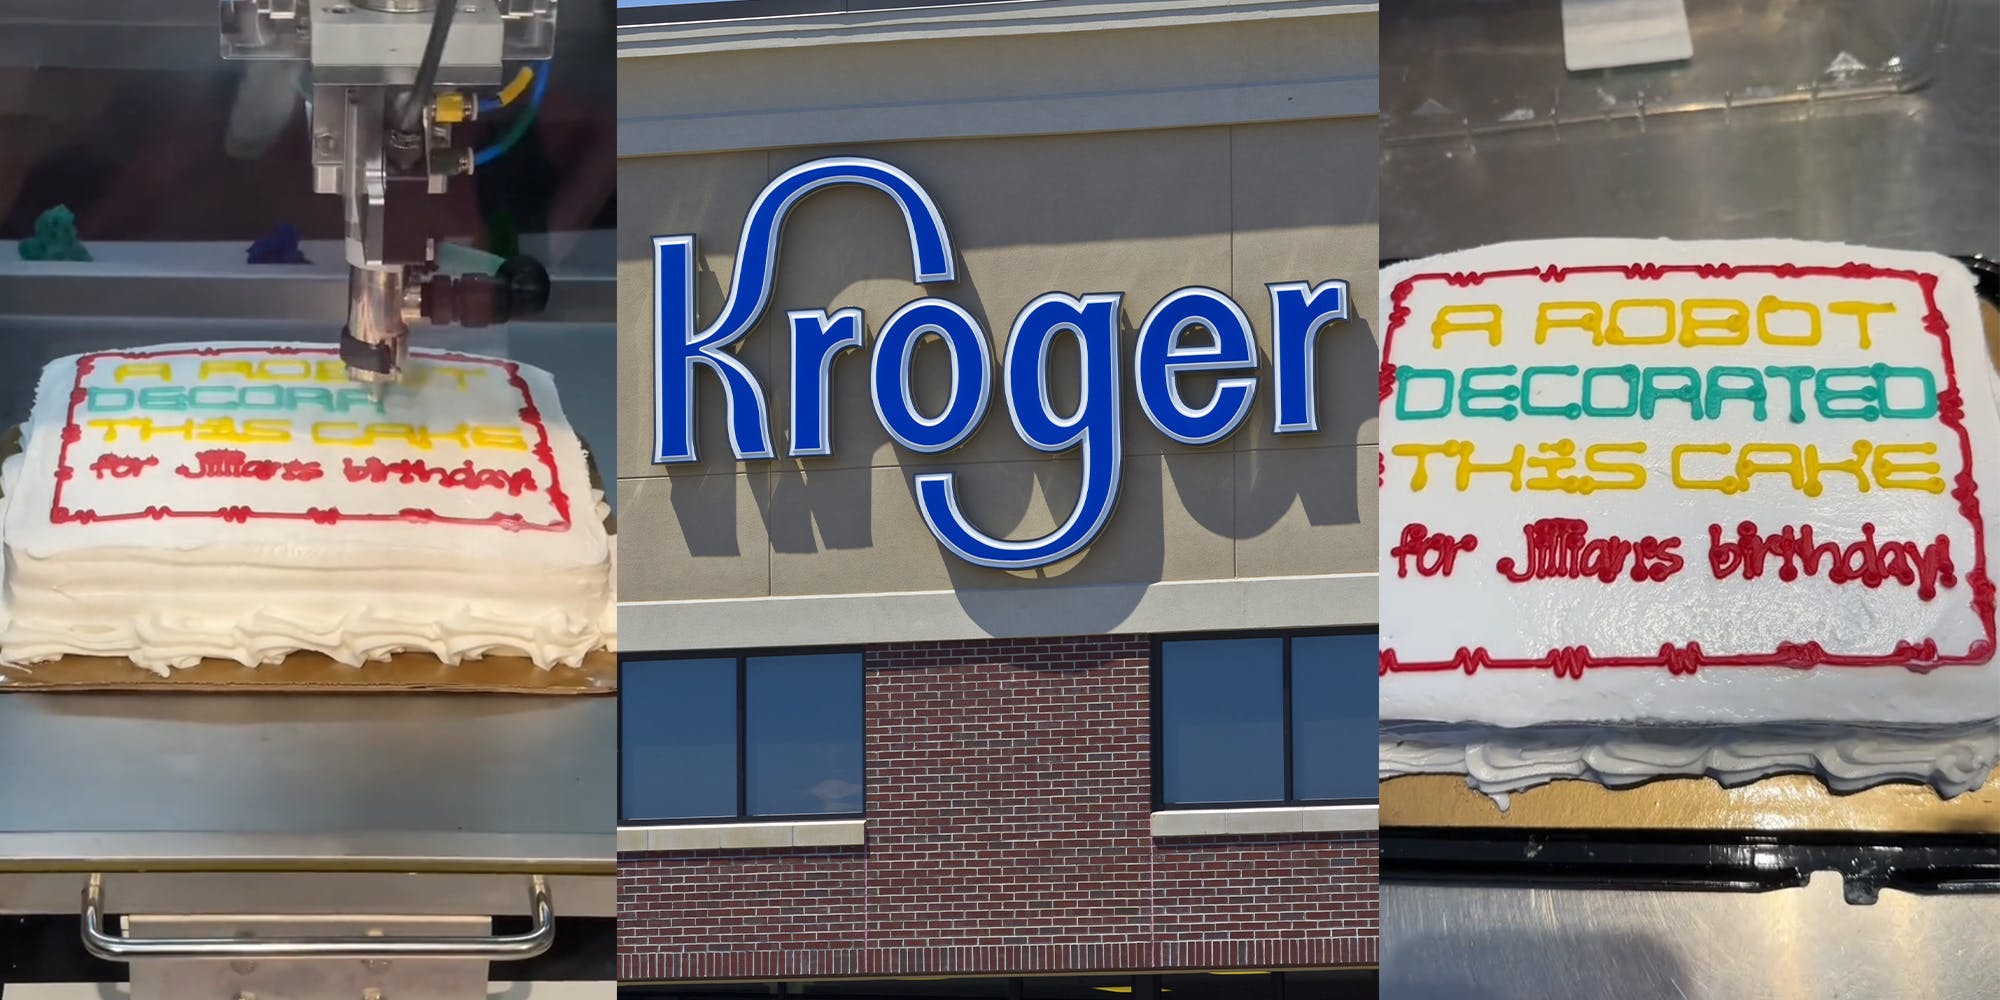 ‘Safe to say cake decorator won’t be going out of business’: Robot makes customer’s cake at Kroger, writes that a robot made it